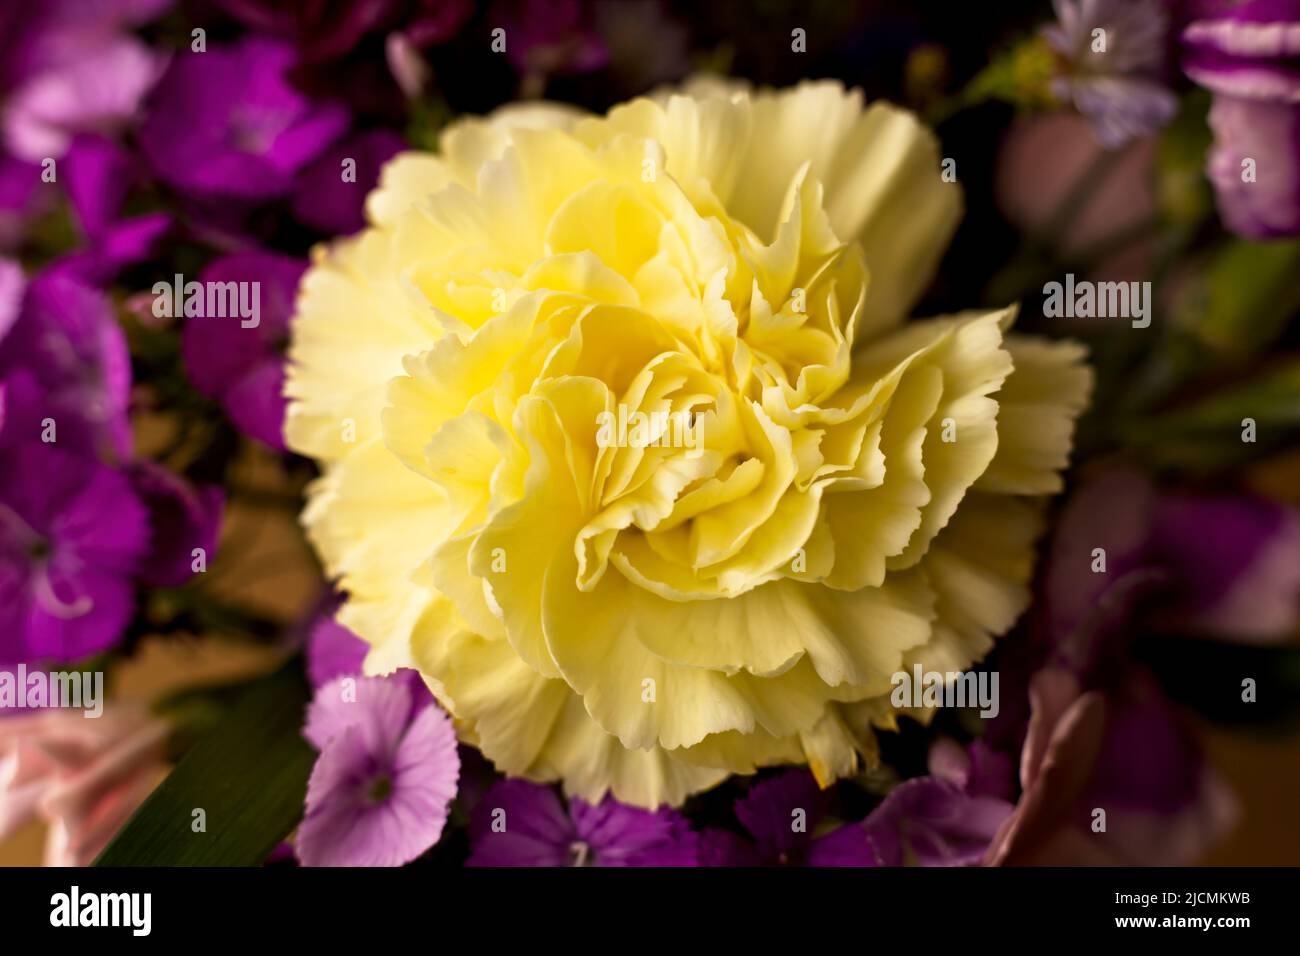 A close up photo of a bright yellow carnation standing out from purple a purple flower background. Stock Photo